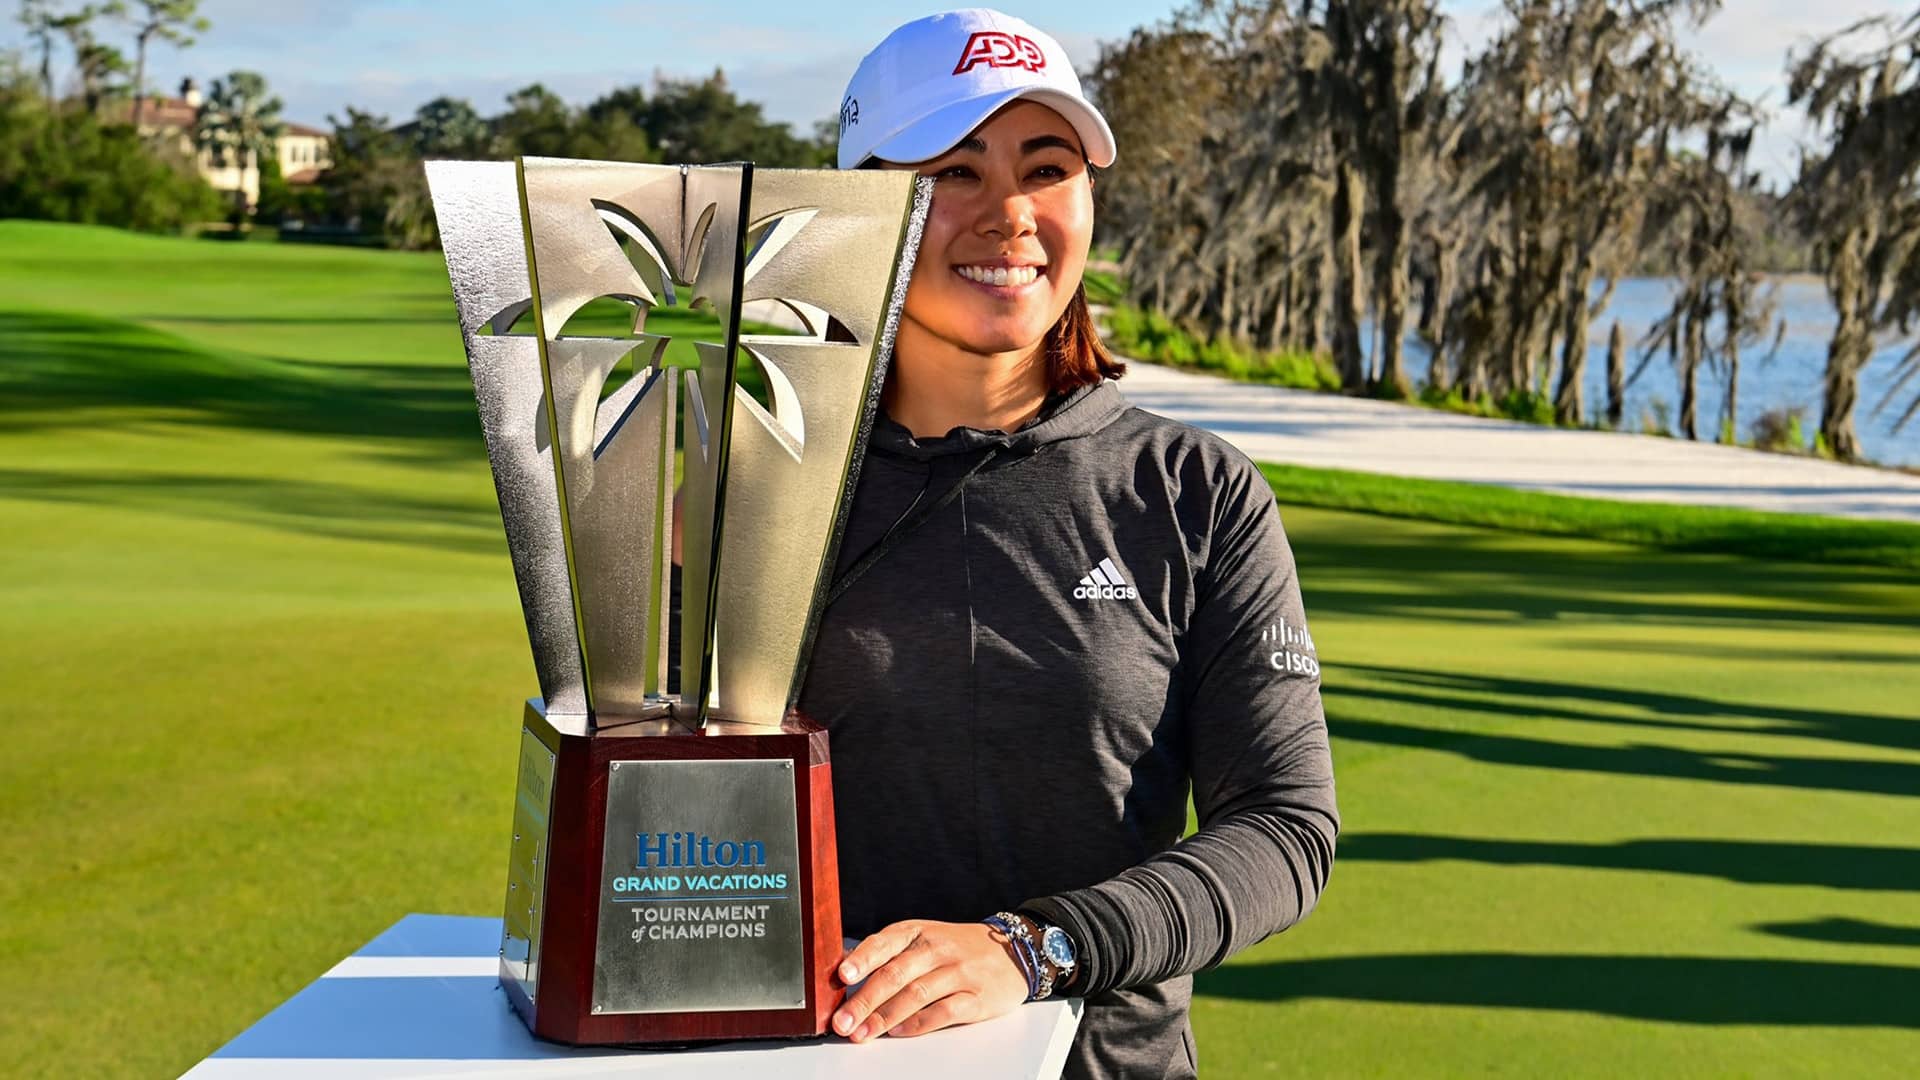 Danielle Kang Hold Tournament of Champions Trophy